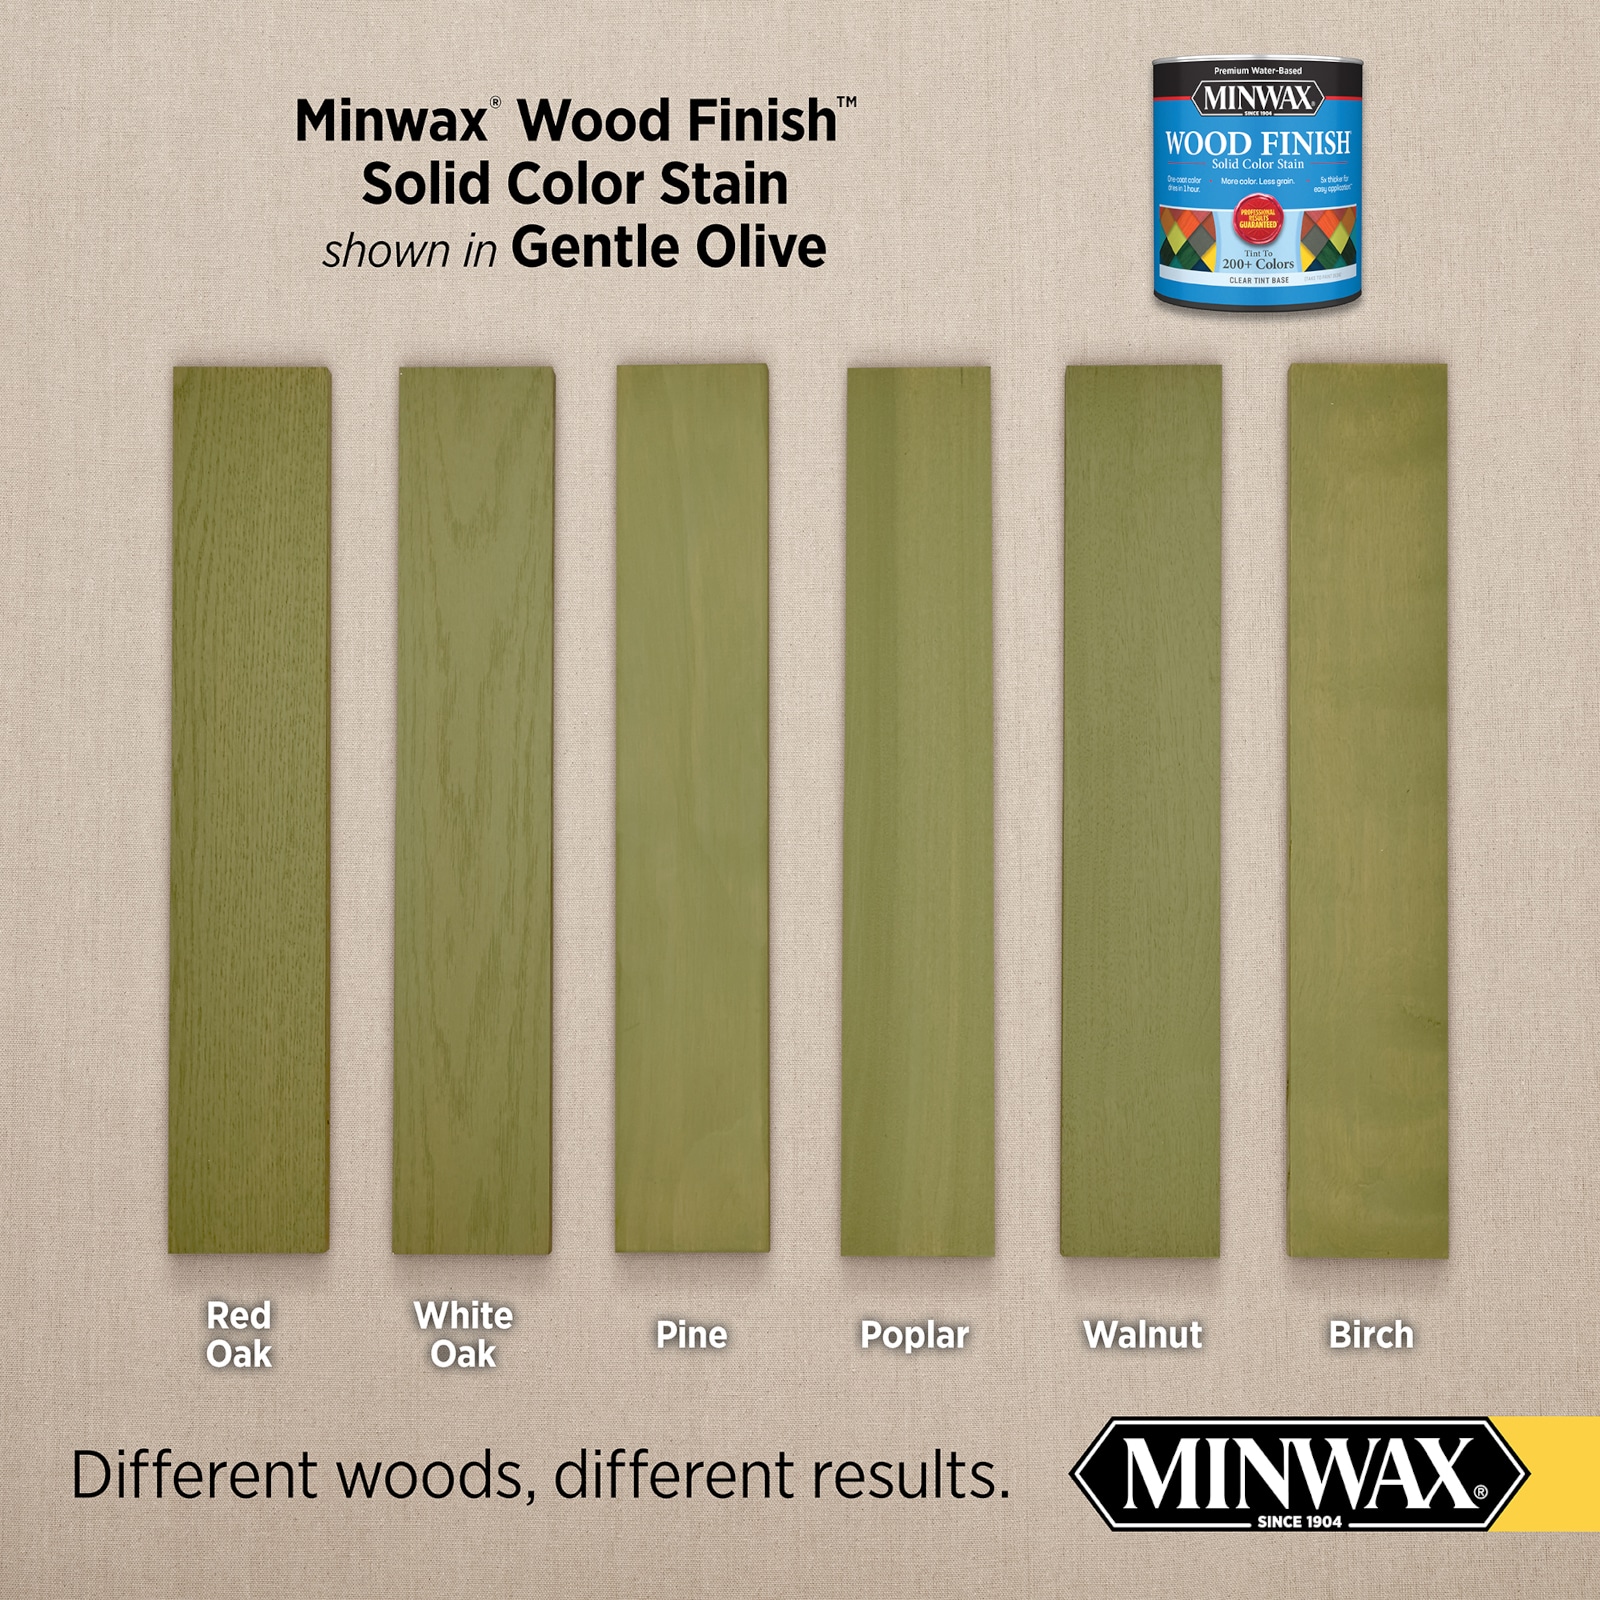 Minwax Water-based Gentle Olive Mw1017 Solid Interior Stain (1